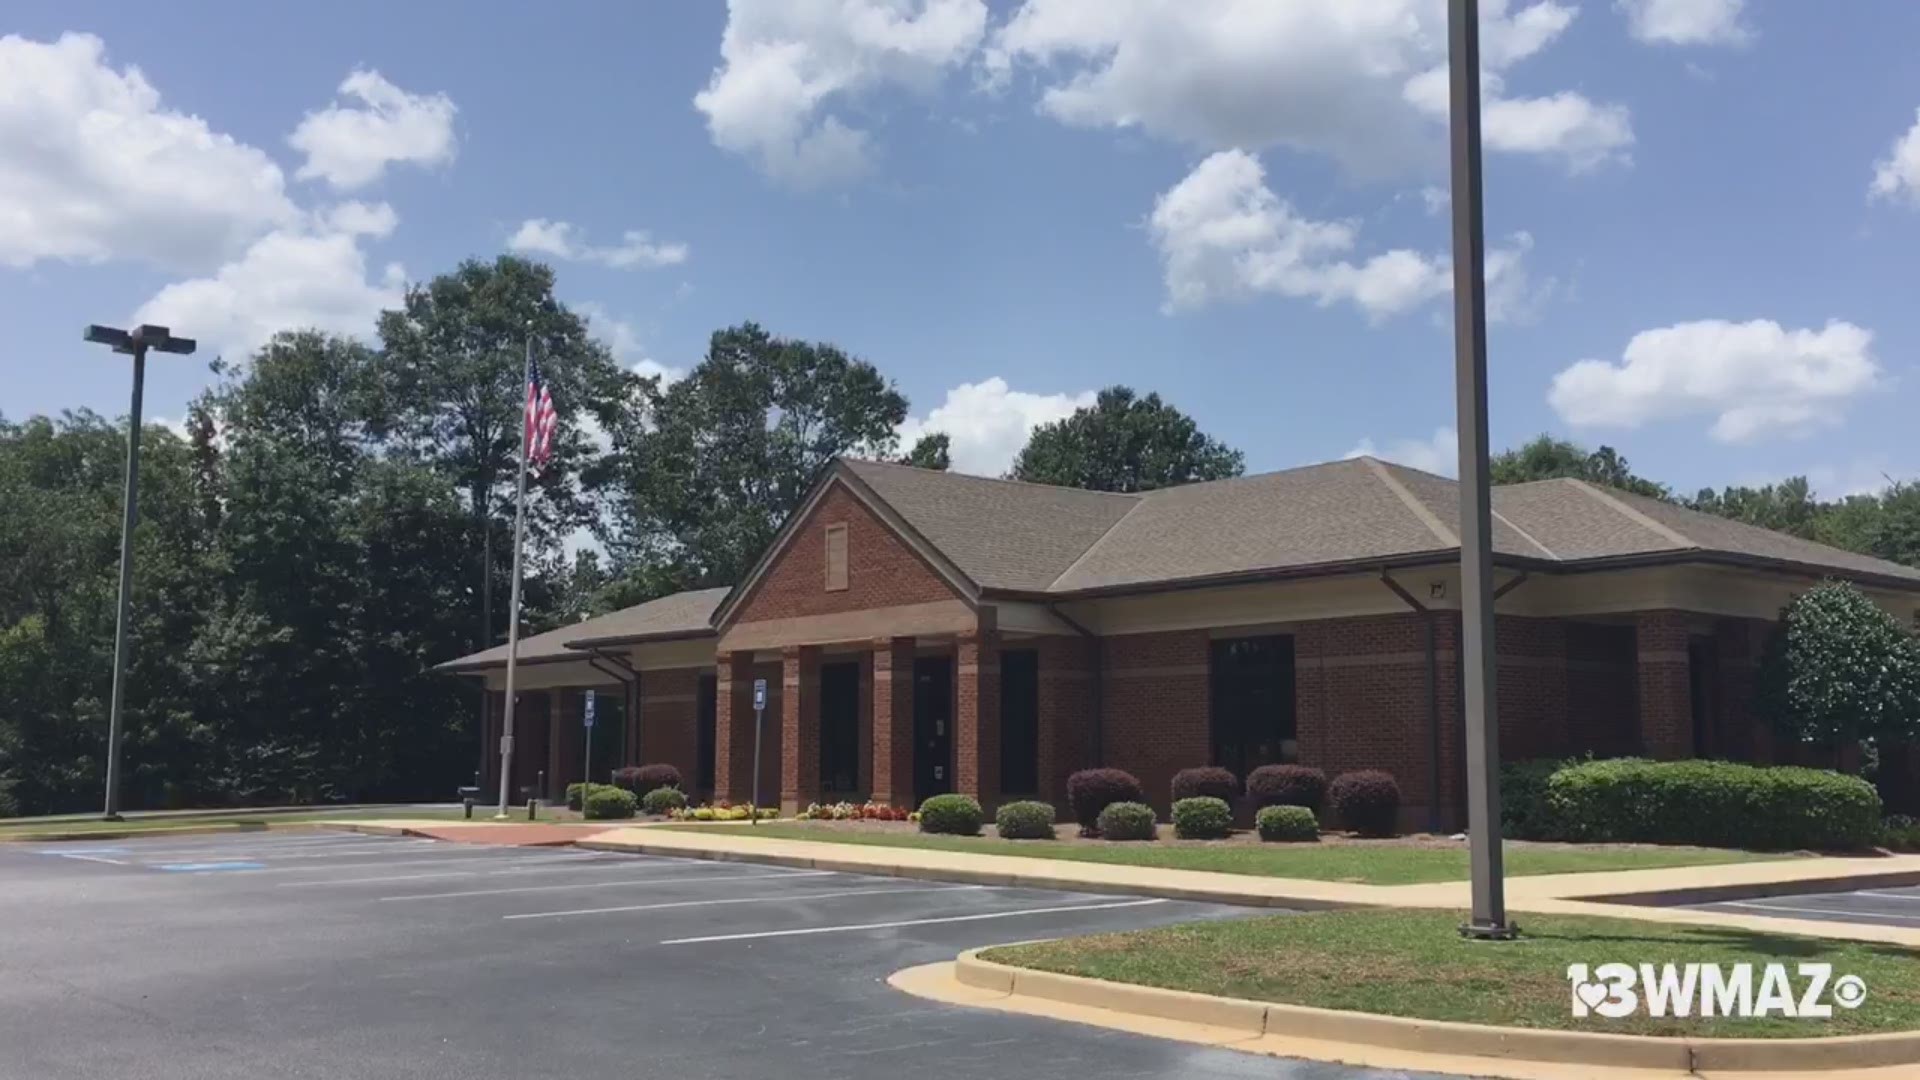 The Bibb County Sheriff’s Office is investigating a robbery that happened at the Mid-South Federal Credit Union on Hartley Bridge Road around 10 a.m.